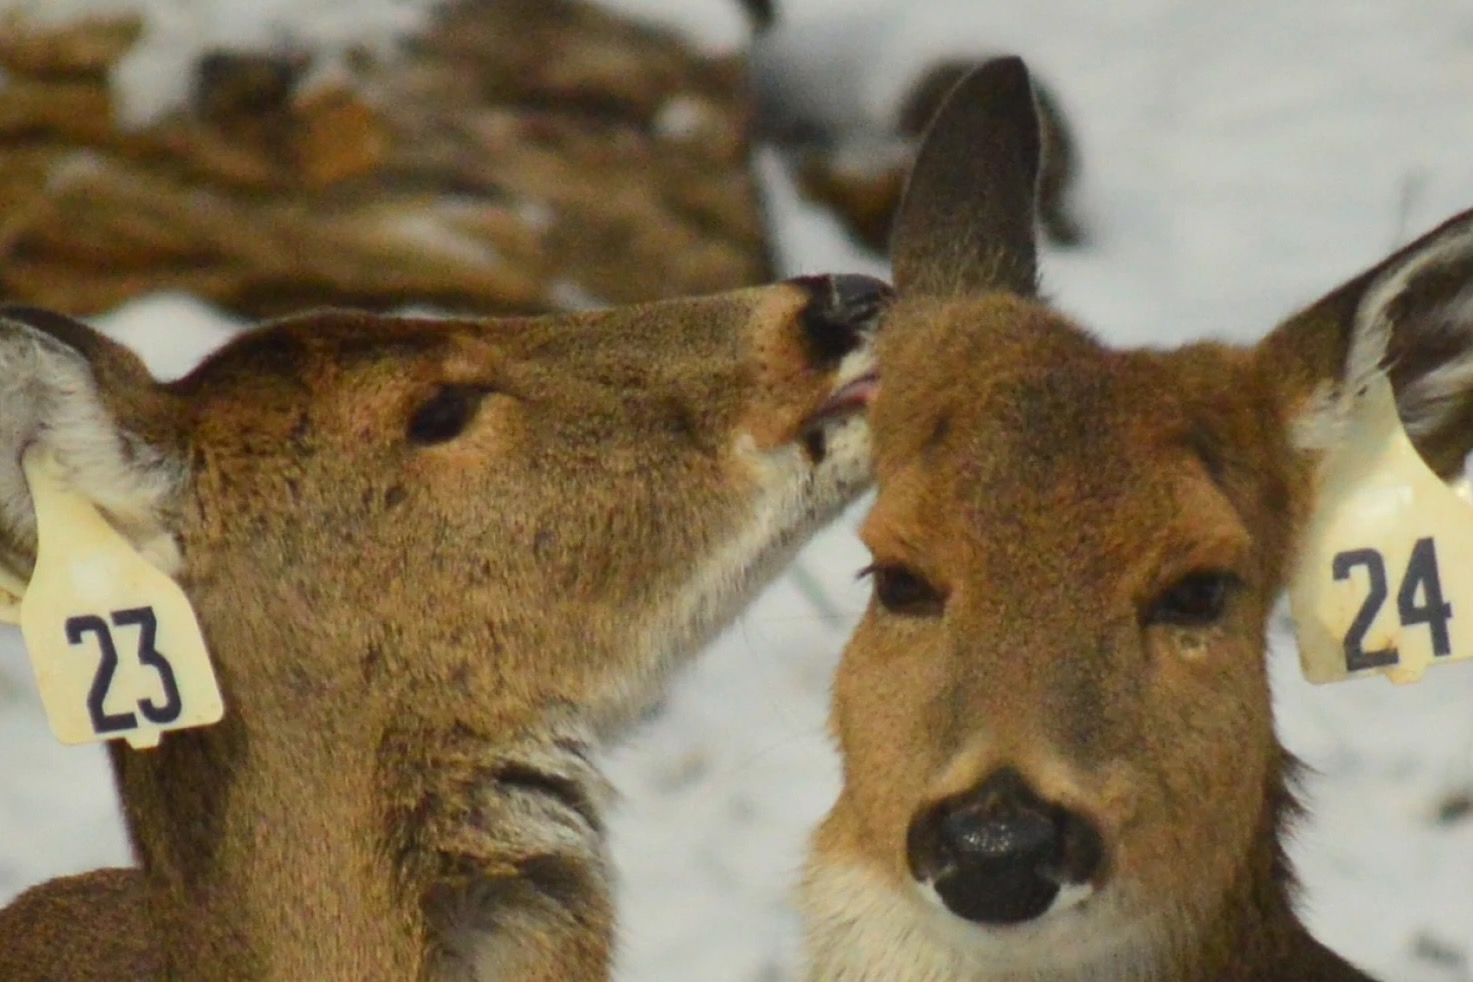 Two deer with tags in their ears.